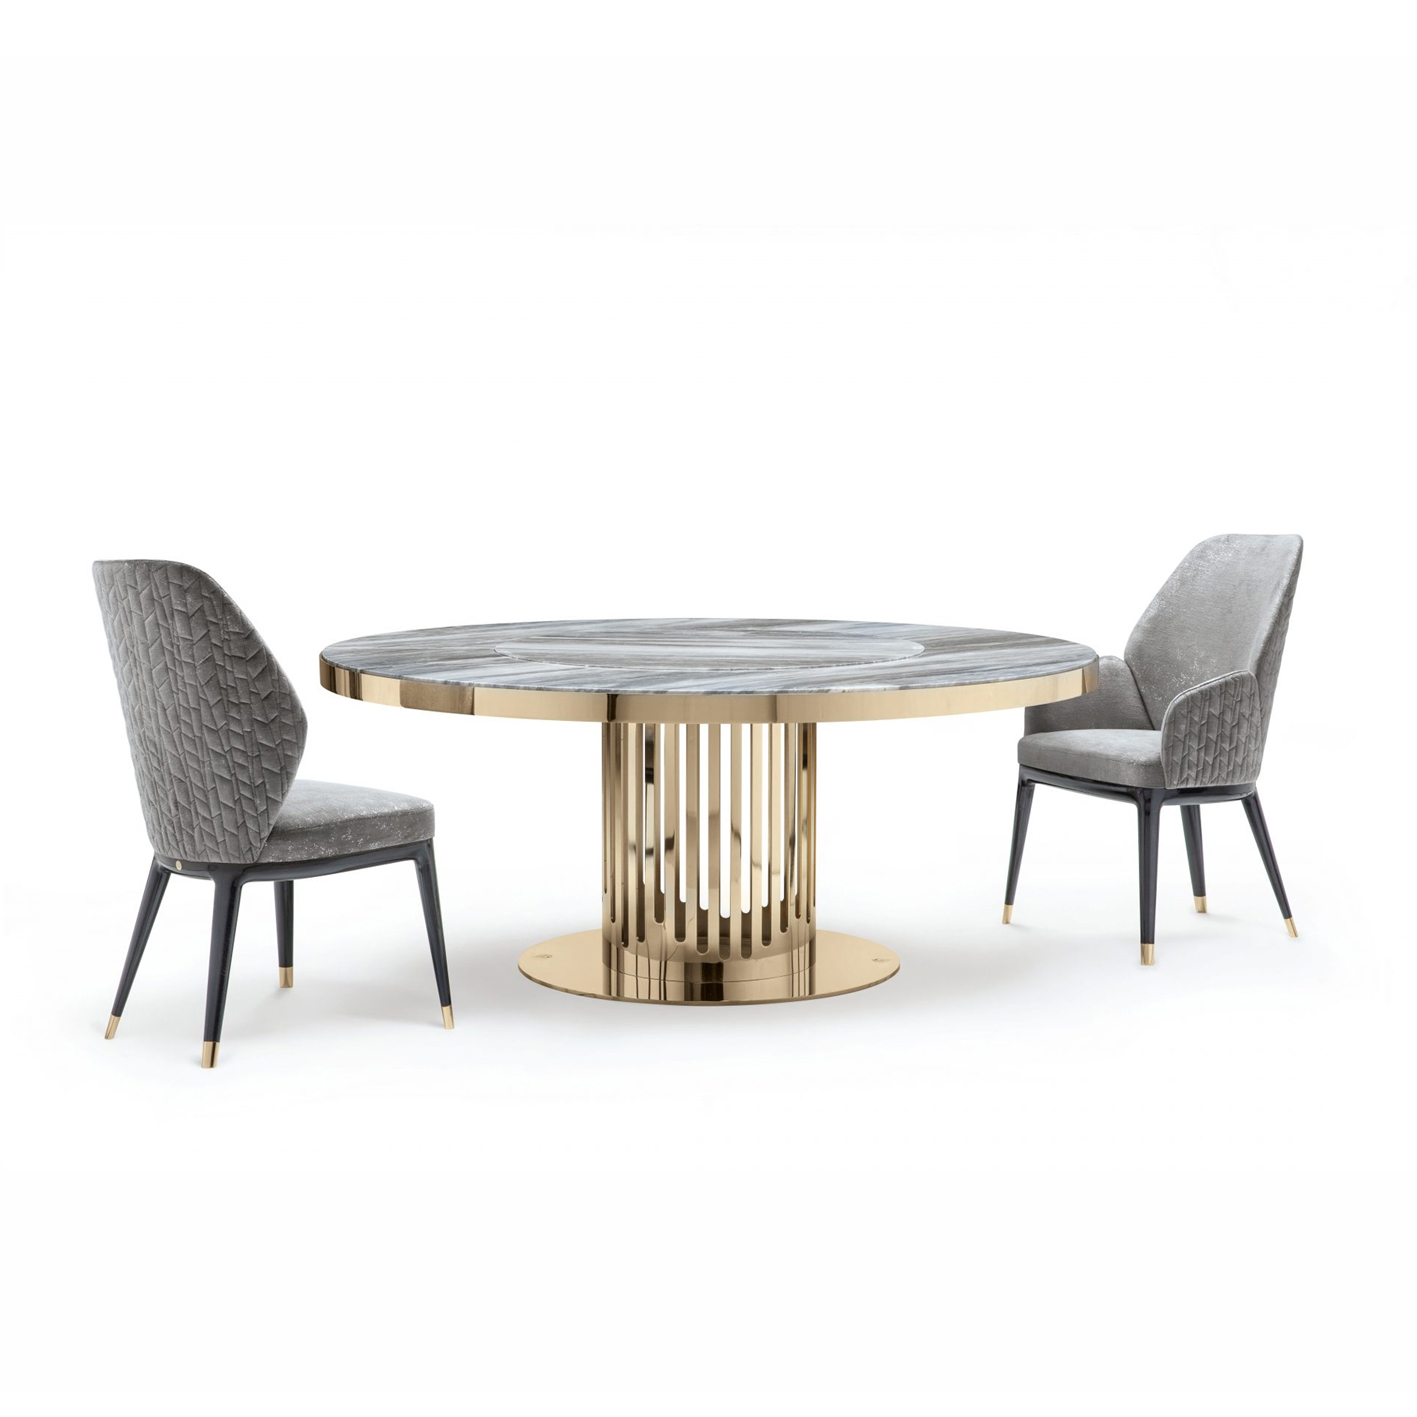 Charisma Round Dining Table